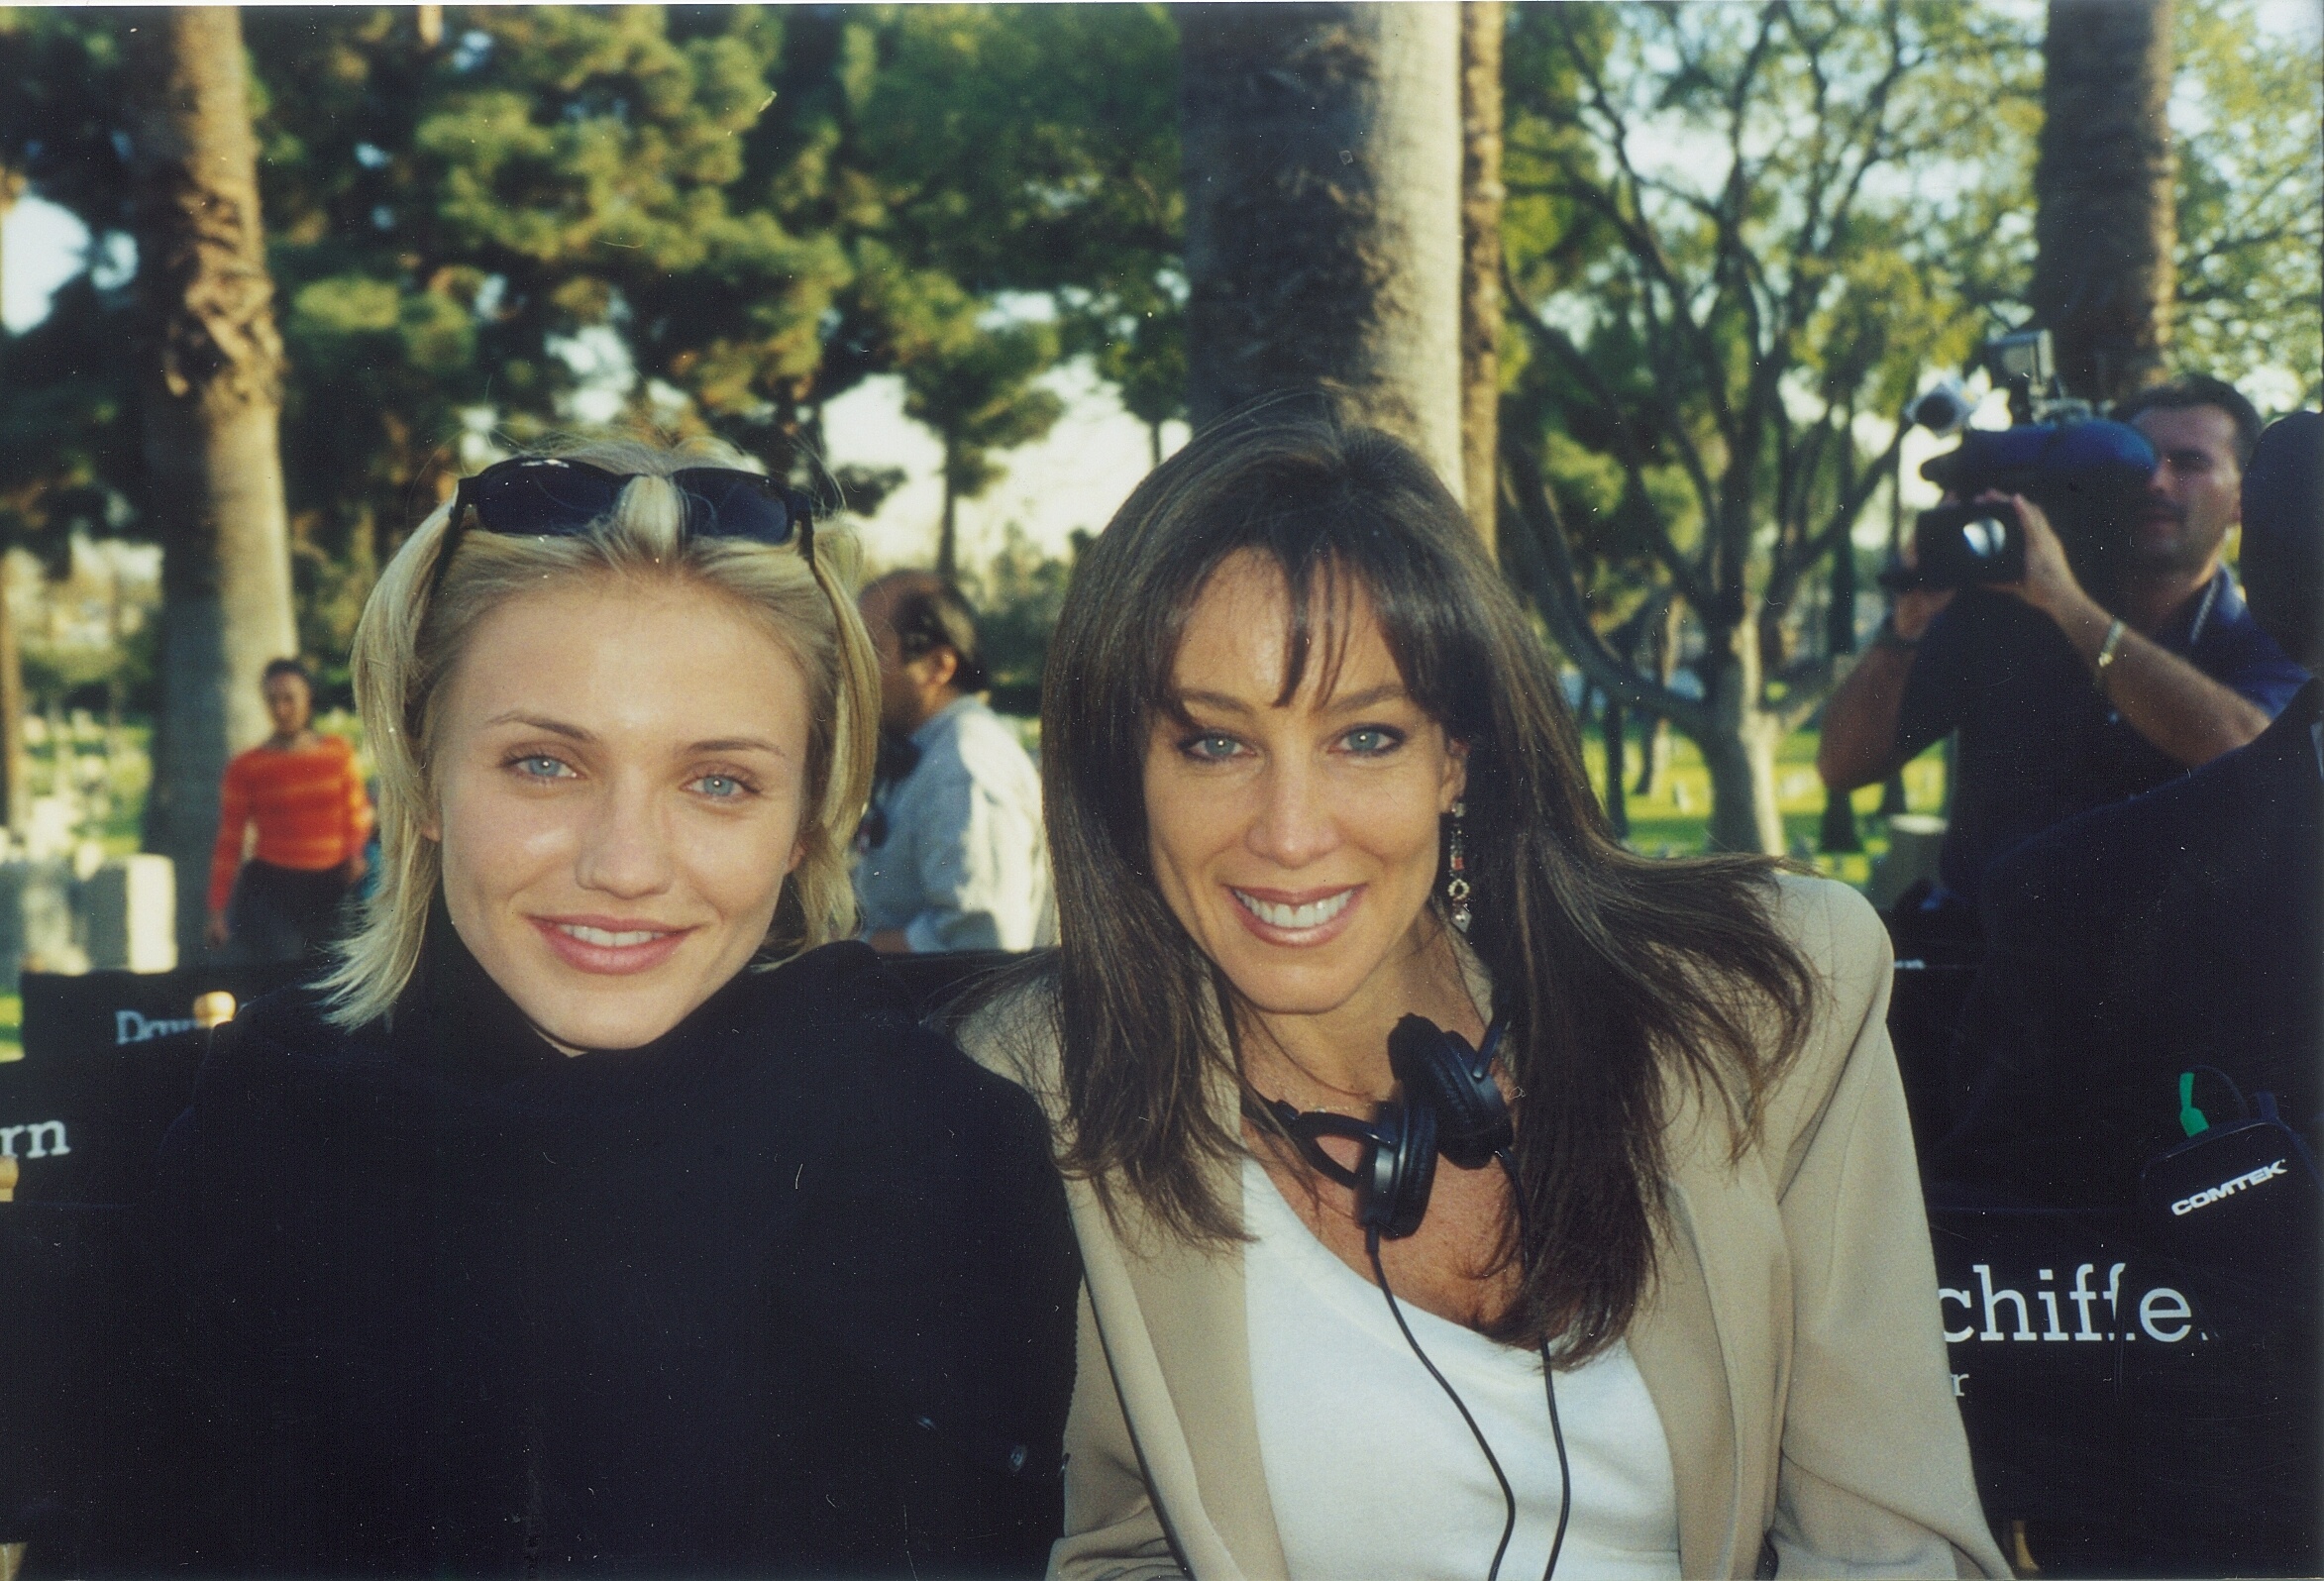 Cameron Diaz and Cindy Cowan on set of Very Bad Things